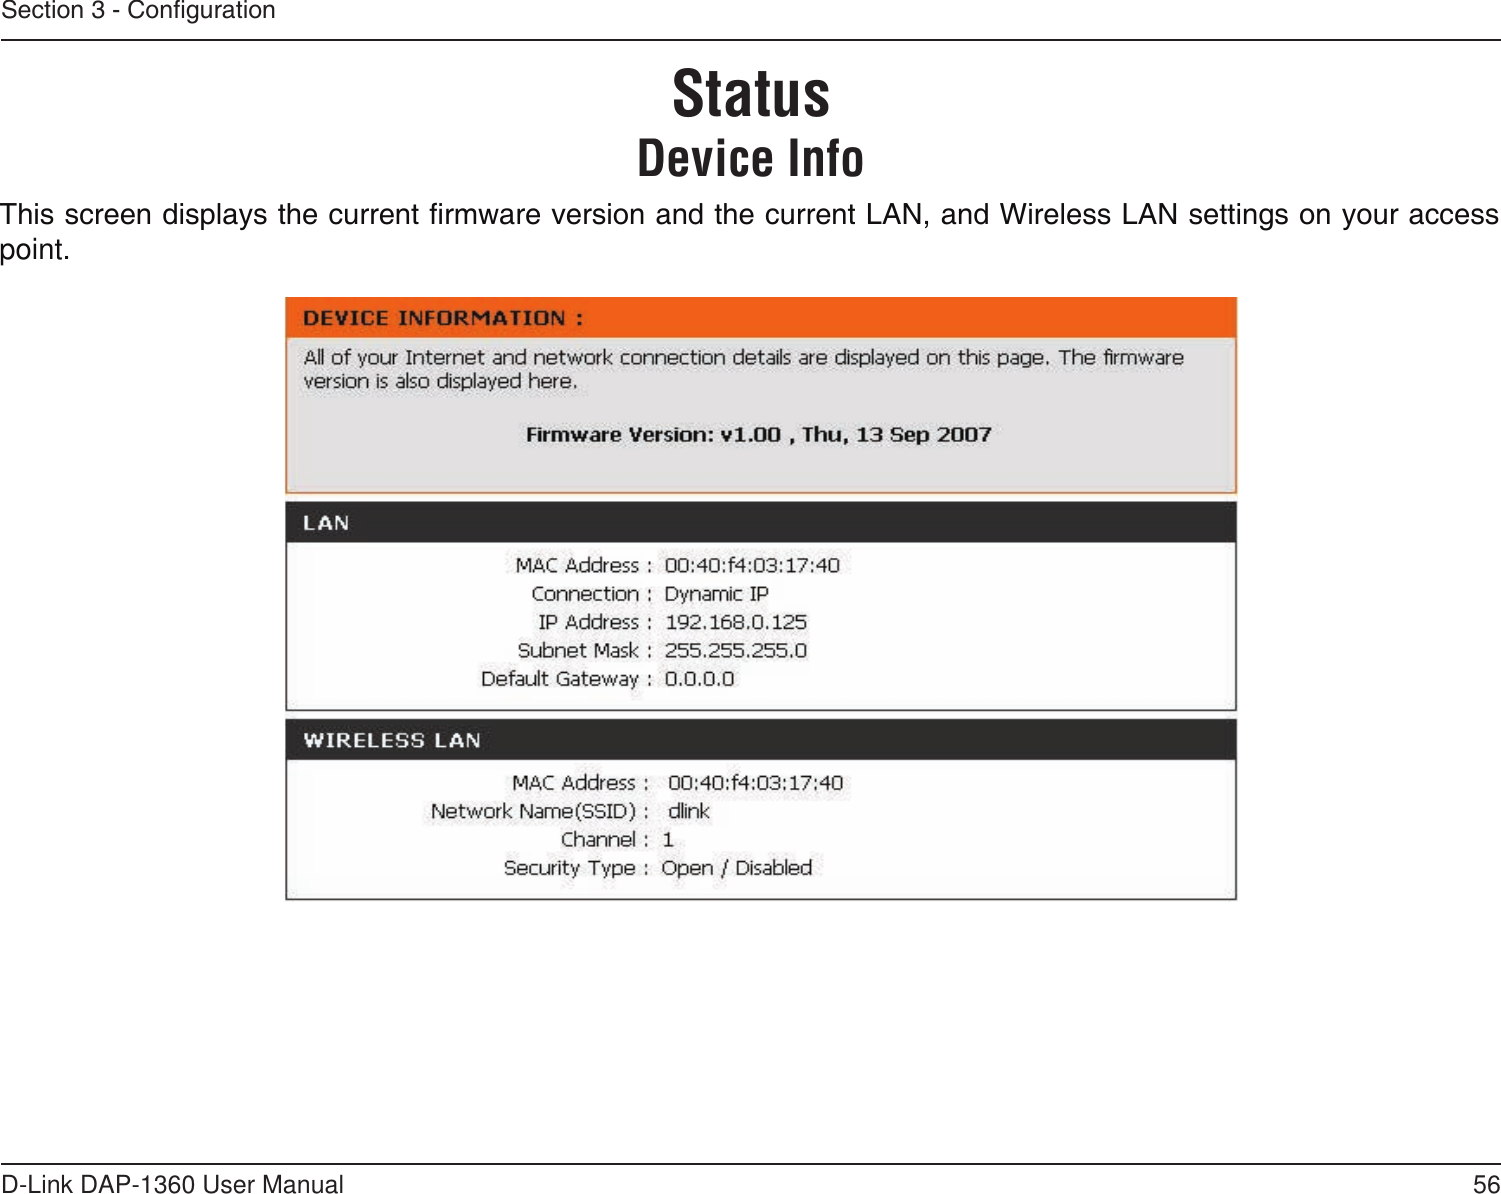 56D-Link DAP-1360 User ManualSection 3 - CongurationThis screen displays the current rmware version and the current LAN, and Wireless LAN settings on your access point.StatusDevice Info